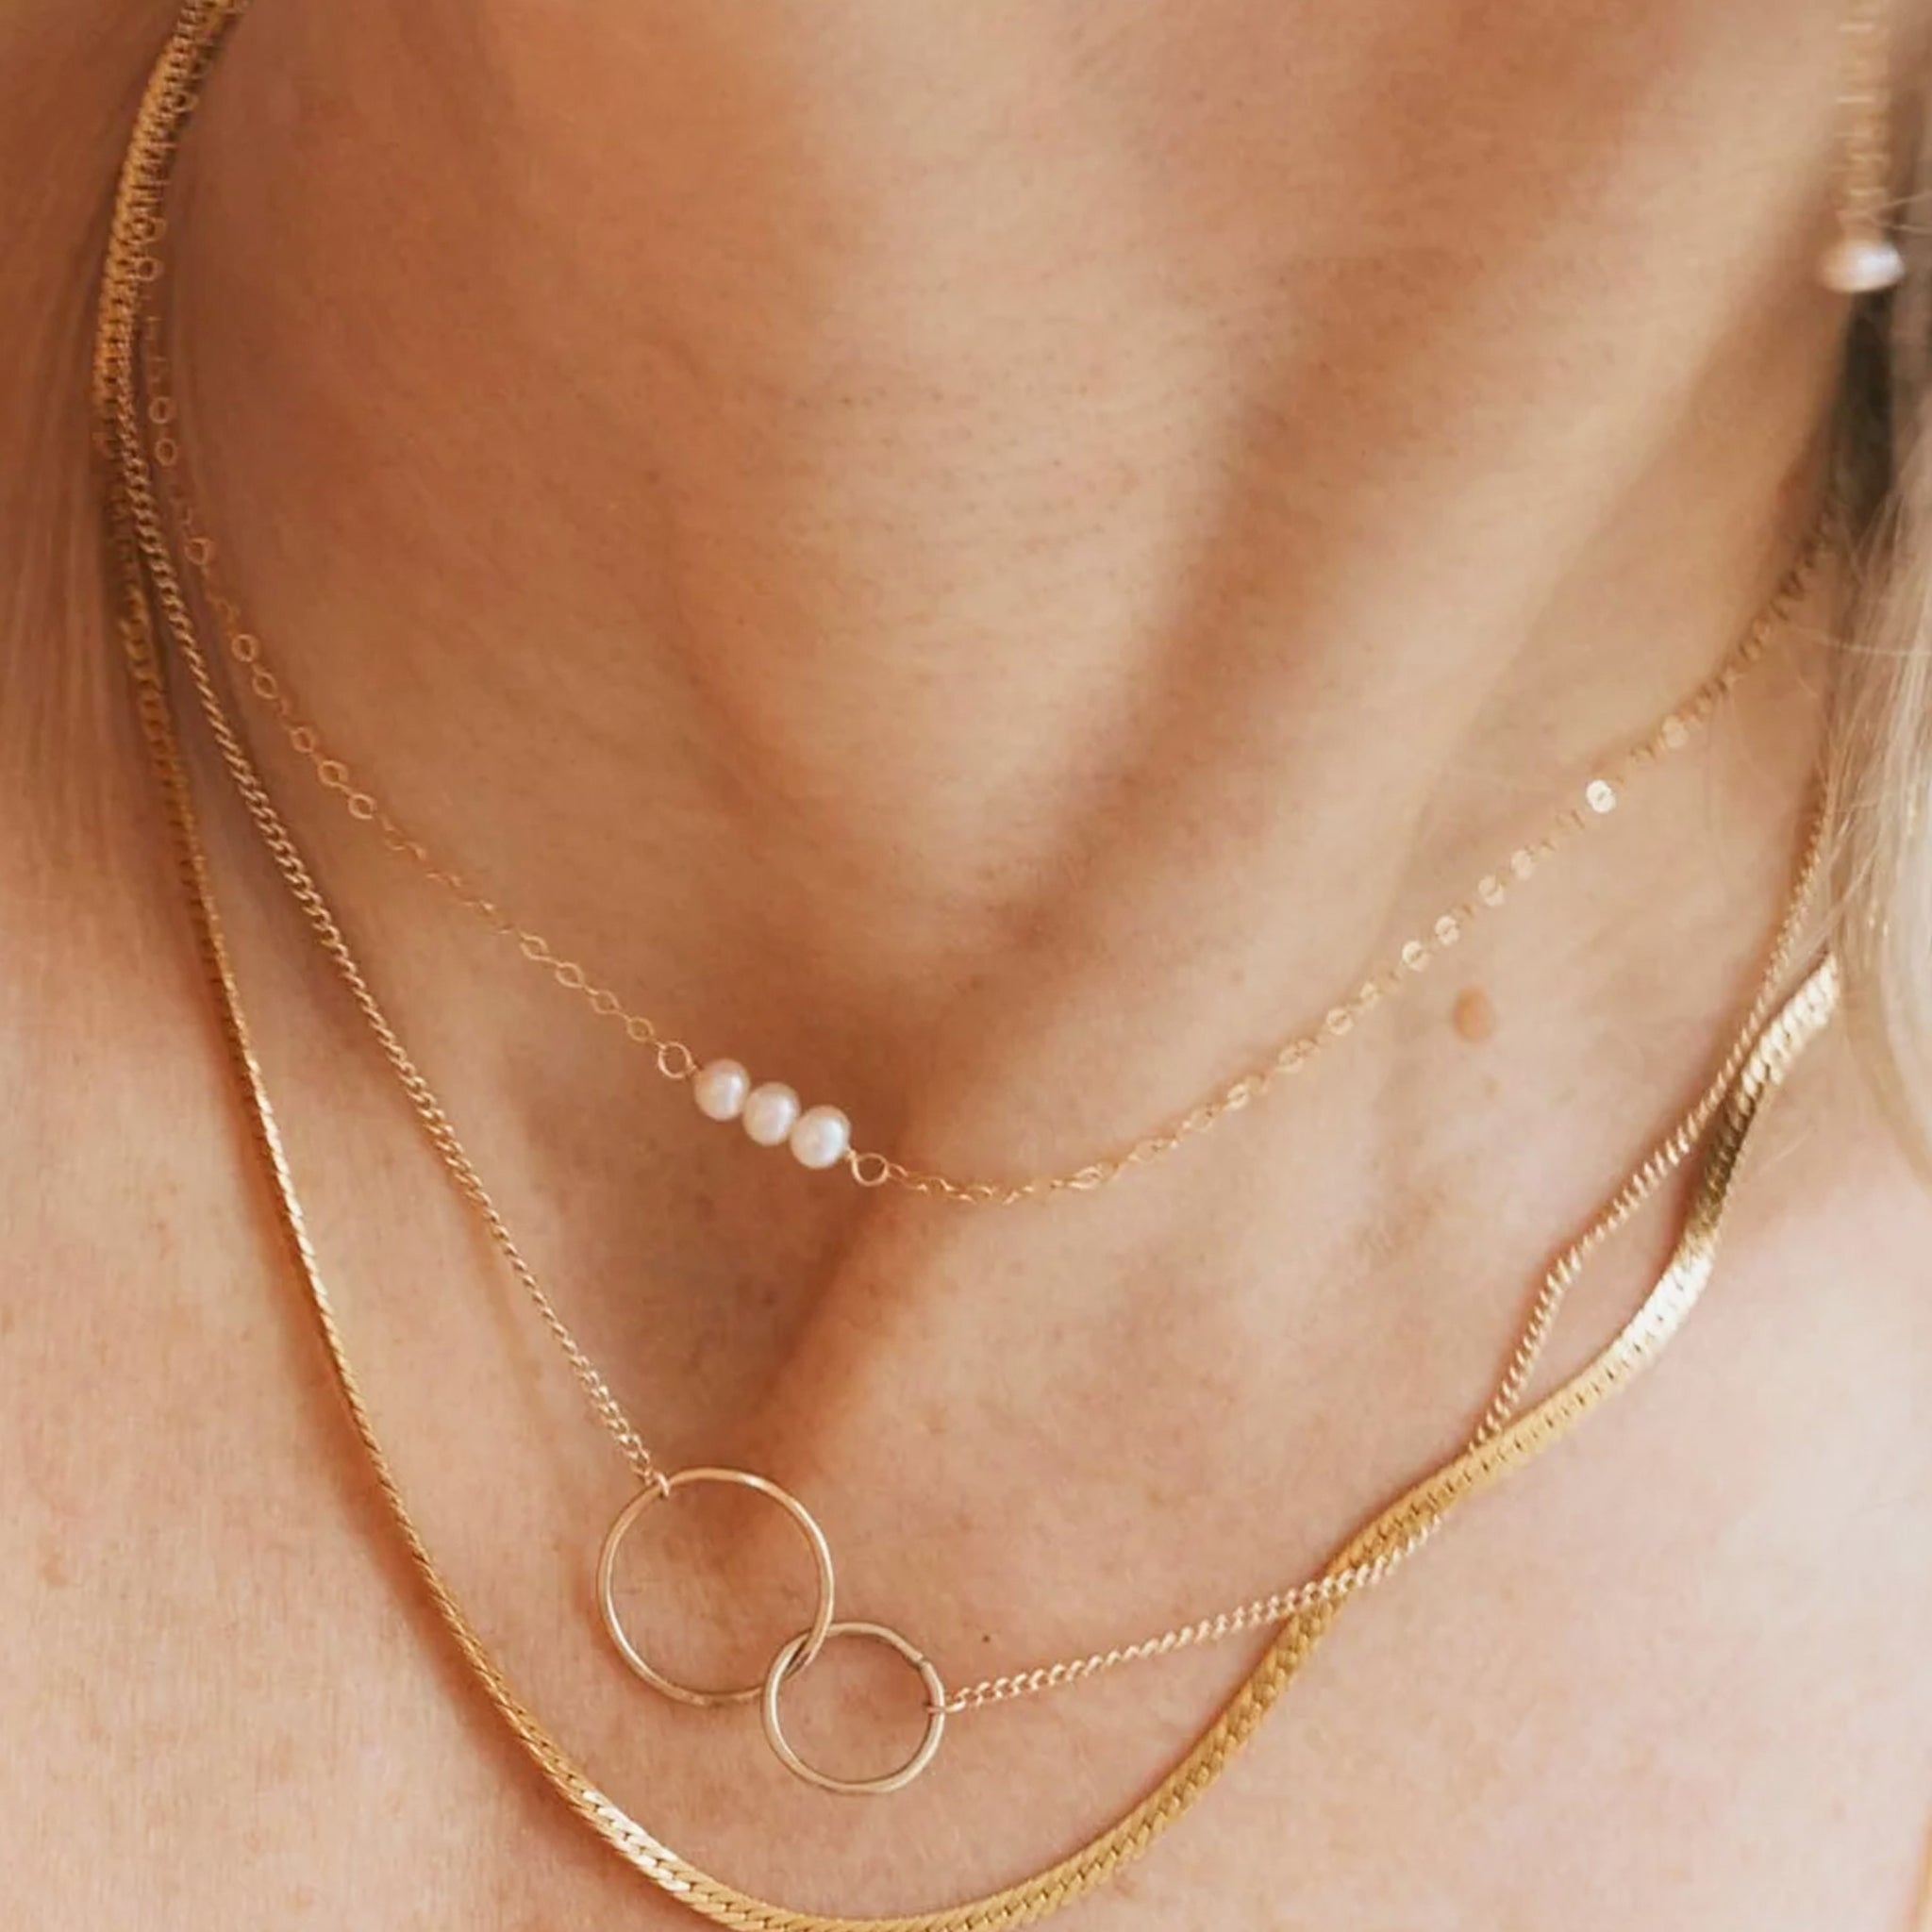 A gold chain necklace with three small pearl connected in the center. 